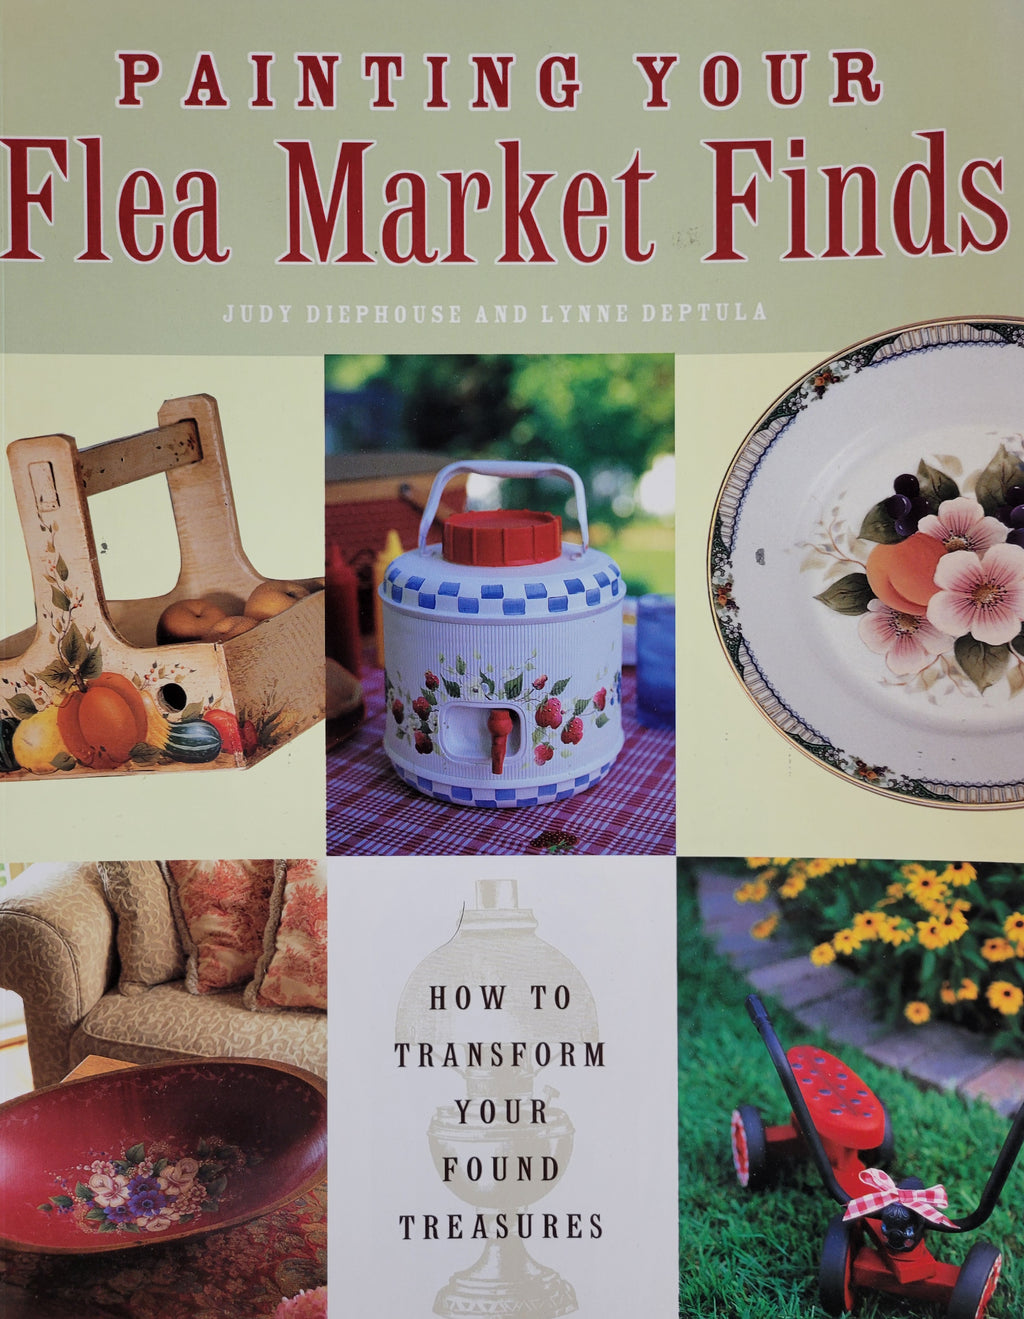 Painting Your Flea Market Finds by Judy Diephouse and Lynne Deptula